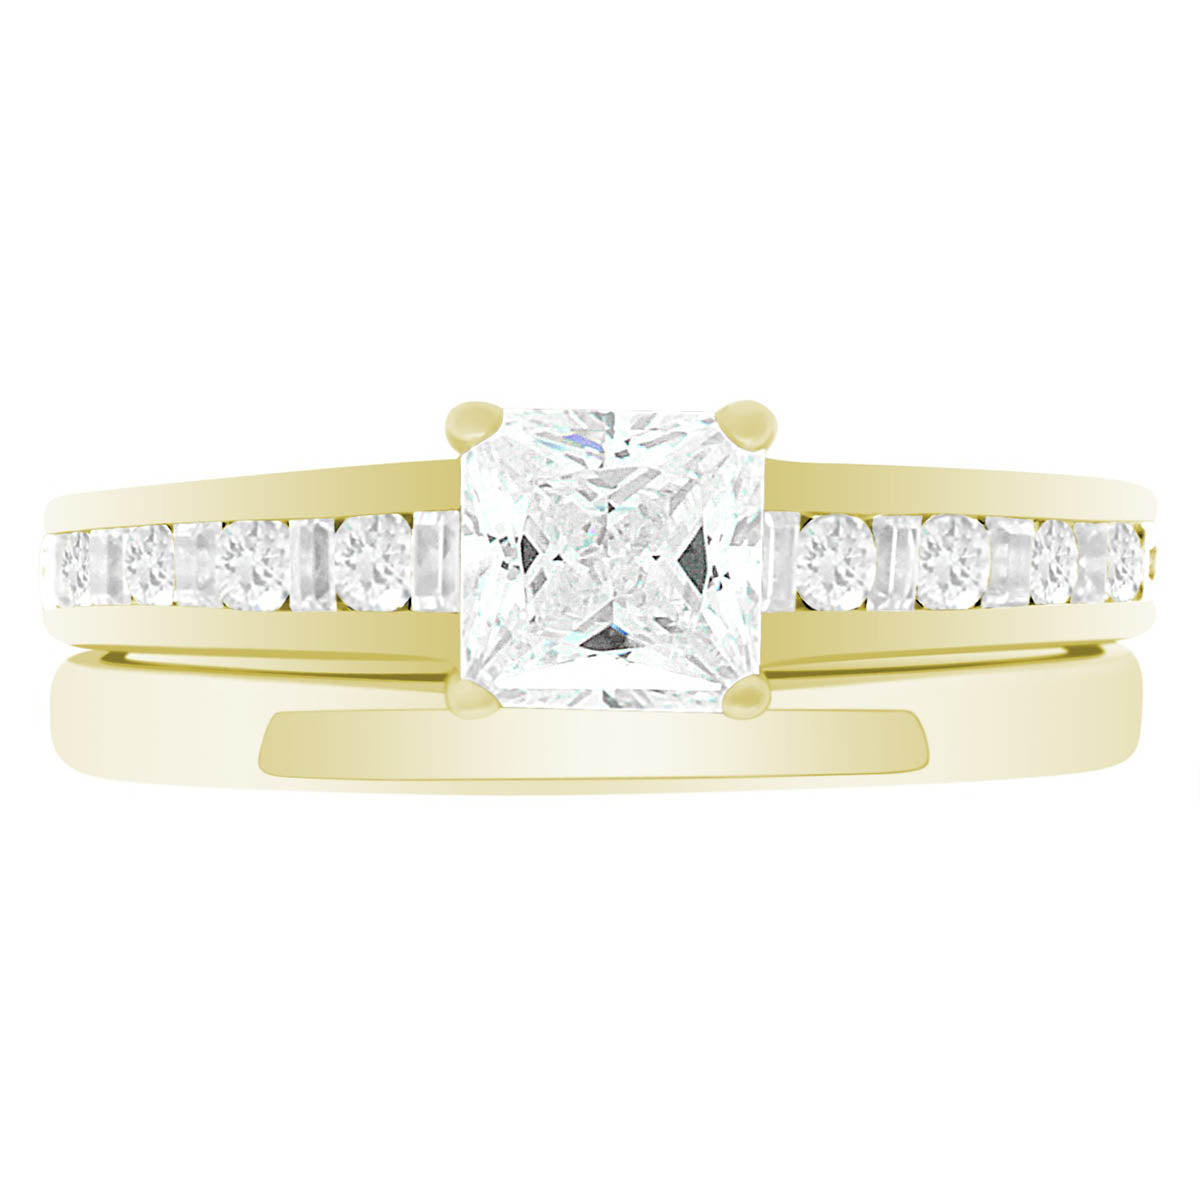 Fancy Cut Diamond Ring made from yellow gold and pictured with a plain wedding ring